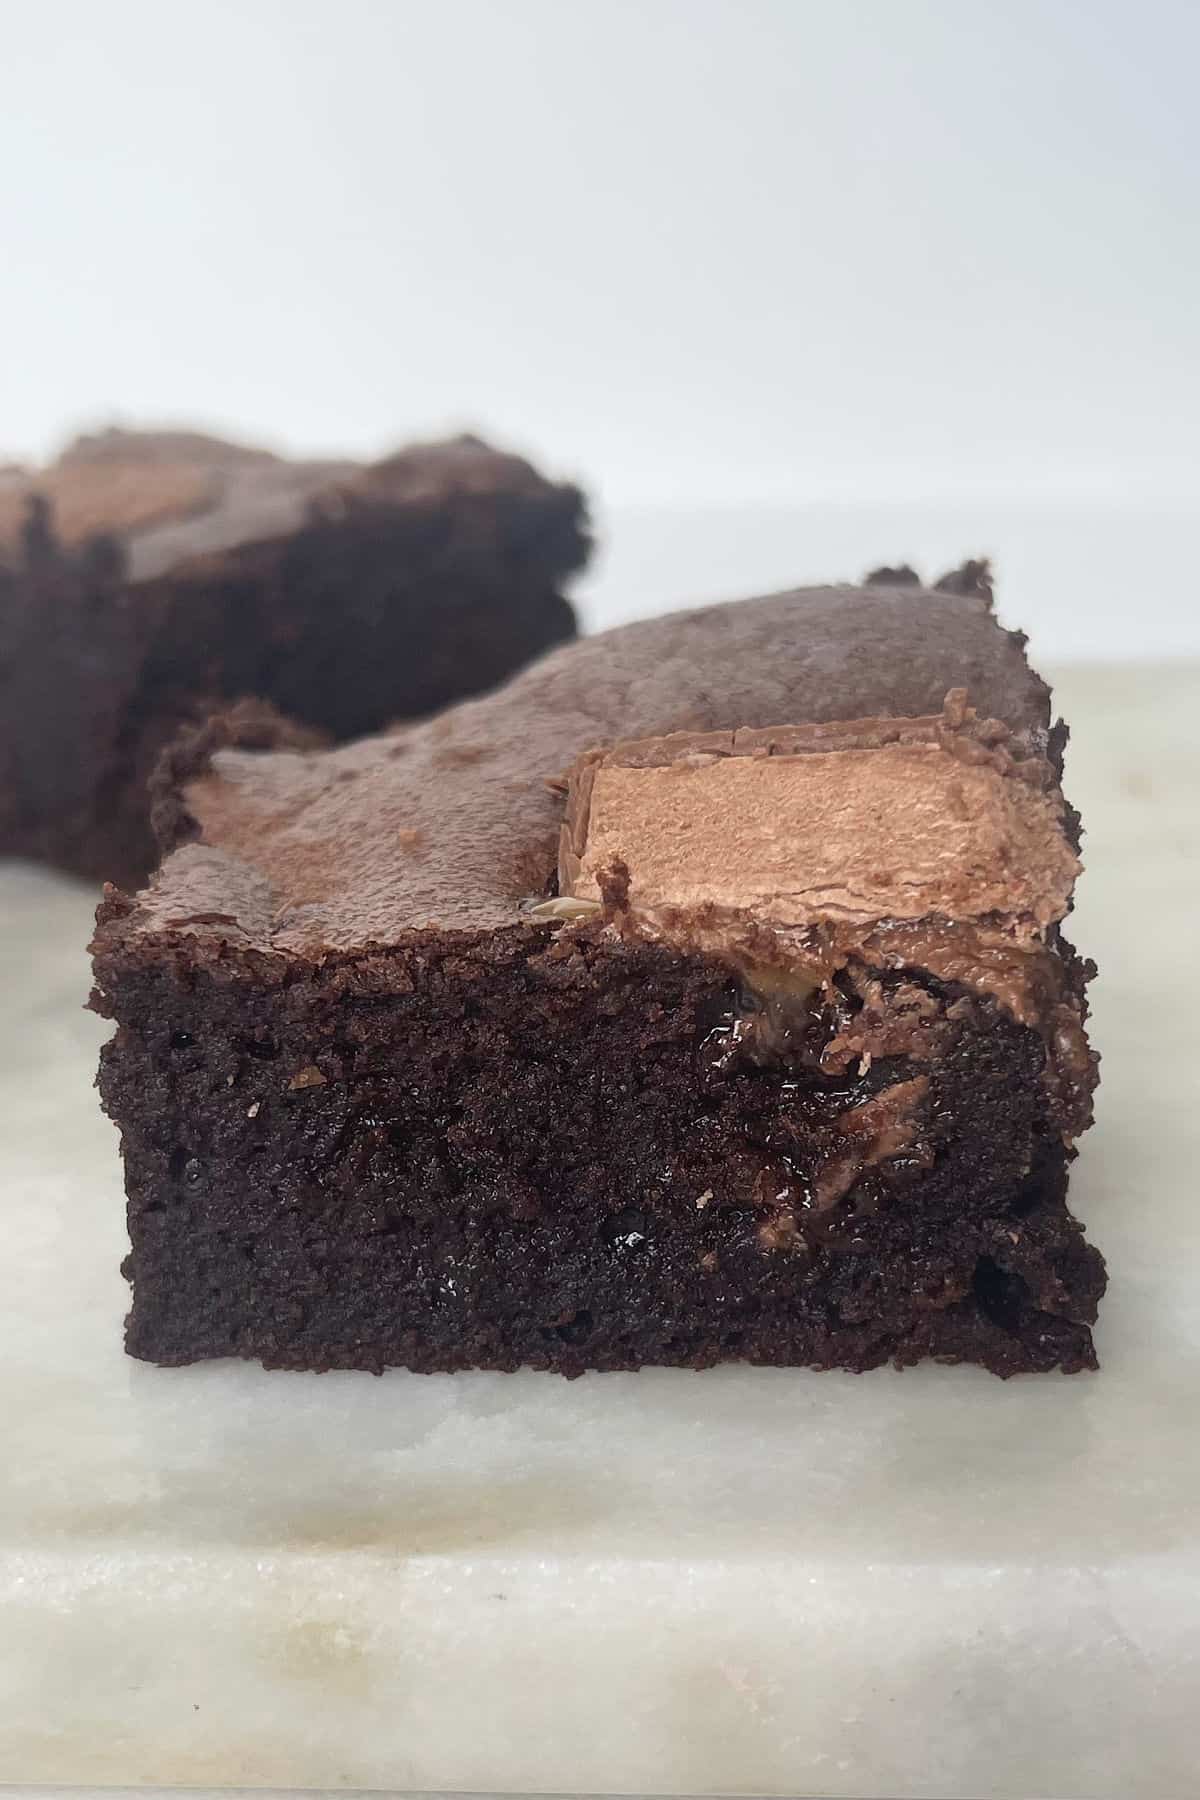 Side view of a mars bar brownie on a stone serving tray. In the background is another brownie.